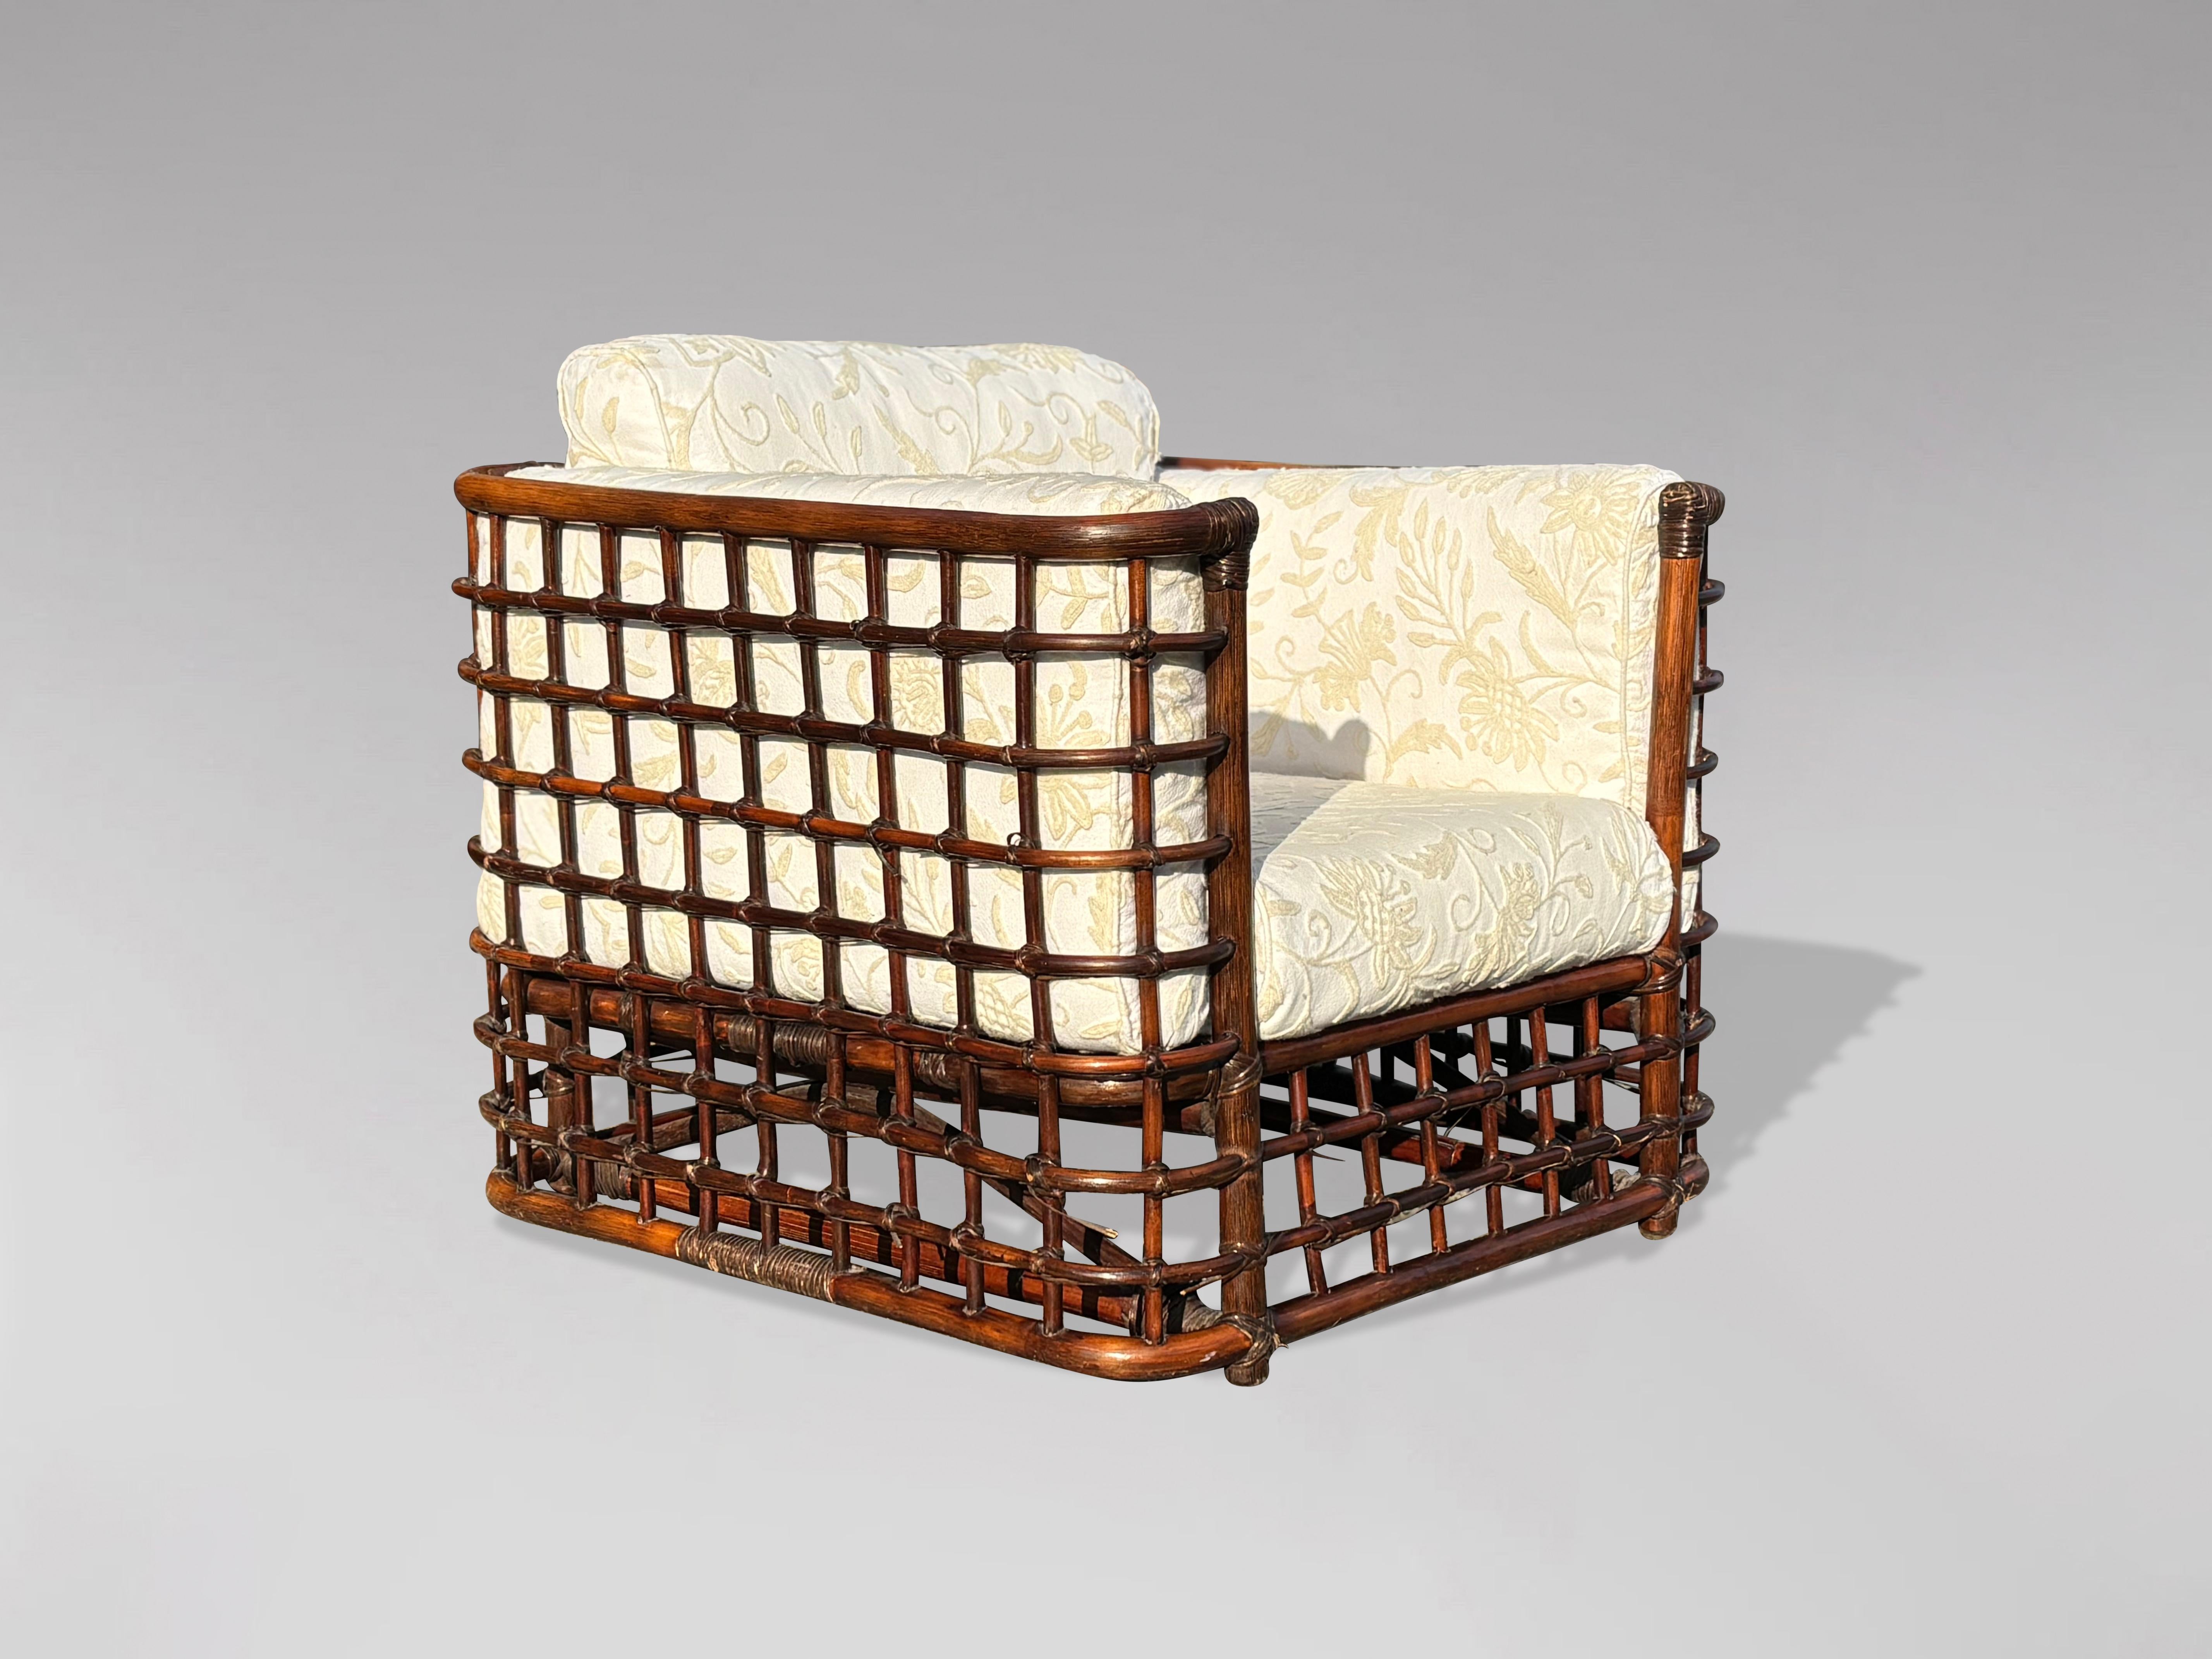 1970s Rattan & Bamboo Cube Lounge Armchair by Henry Olko For Sale 2